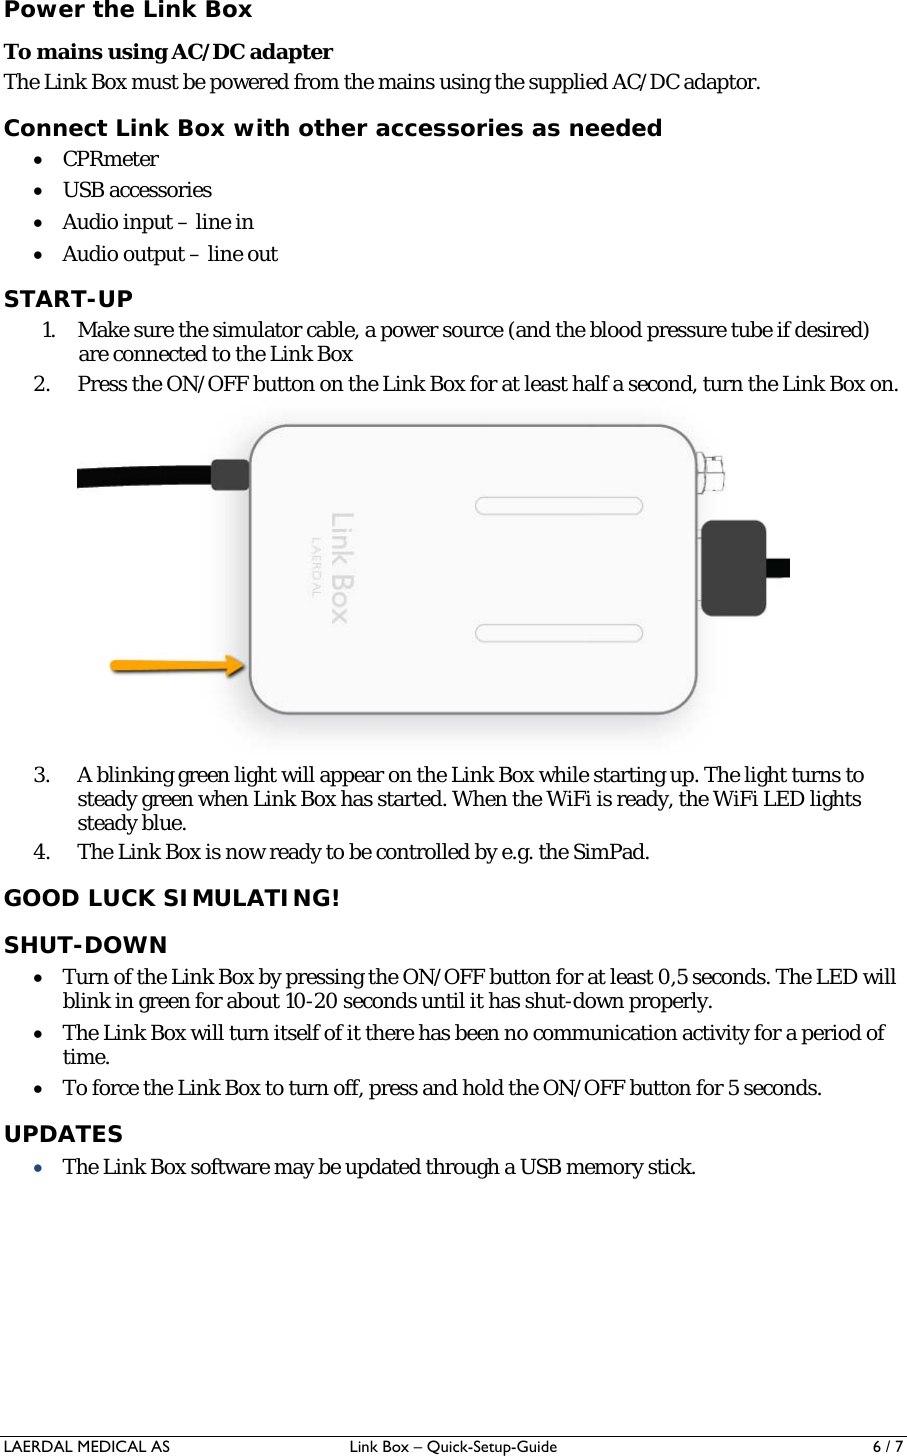 LAERDAL MEDICAL AS  Link Box – Quick-Setup-Guide  6 / 7 Power the Link Box To mains using AC/DC adapter The Link Box must be powered from the mains using the supplied AC/DC adaptor. Connect Link Box with other accessories as needed  CPRmeter  USB accessories  Audio input – line in  Audio output – line out START-UP 1. Make sure the simulator cable, a power source (and the blood pressure tube if desired) are connected to the Link Box 2. Press the ON/OFF button on the Link Box for at least half a second, turn the Link Box on.  3. A blinking green light will appear on the Link Box while starting up. The light turns to steady green when Link Box has started. When the WiFi is ready, the WiFi LED lights steady blue. 4. The Link Box is now ready to be controlled by e.g. the SimPad.  GOOD LUCK SIMULATING! SHUT-DOWN  Turn of the Link Box by pressing the ON/OFF button for at least 0,5 seconds. The LED will blink in green for about 10-20 seconds until it has shut-down properly.  The Link Box will turn itself of it there has been no communication activity for a period of time.  To force the Link Box to turn off, press and hold the ON/OFF button for 5 seconds. UPDATES  The Link Box software may be updated through a USB memory stick. 